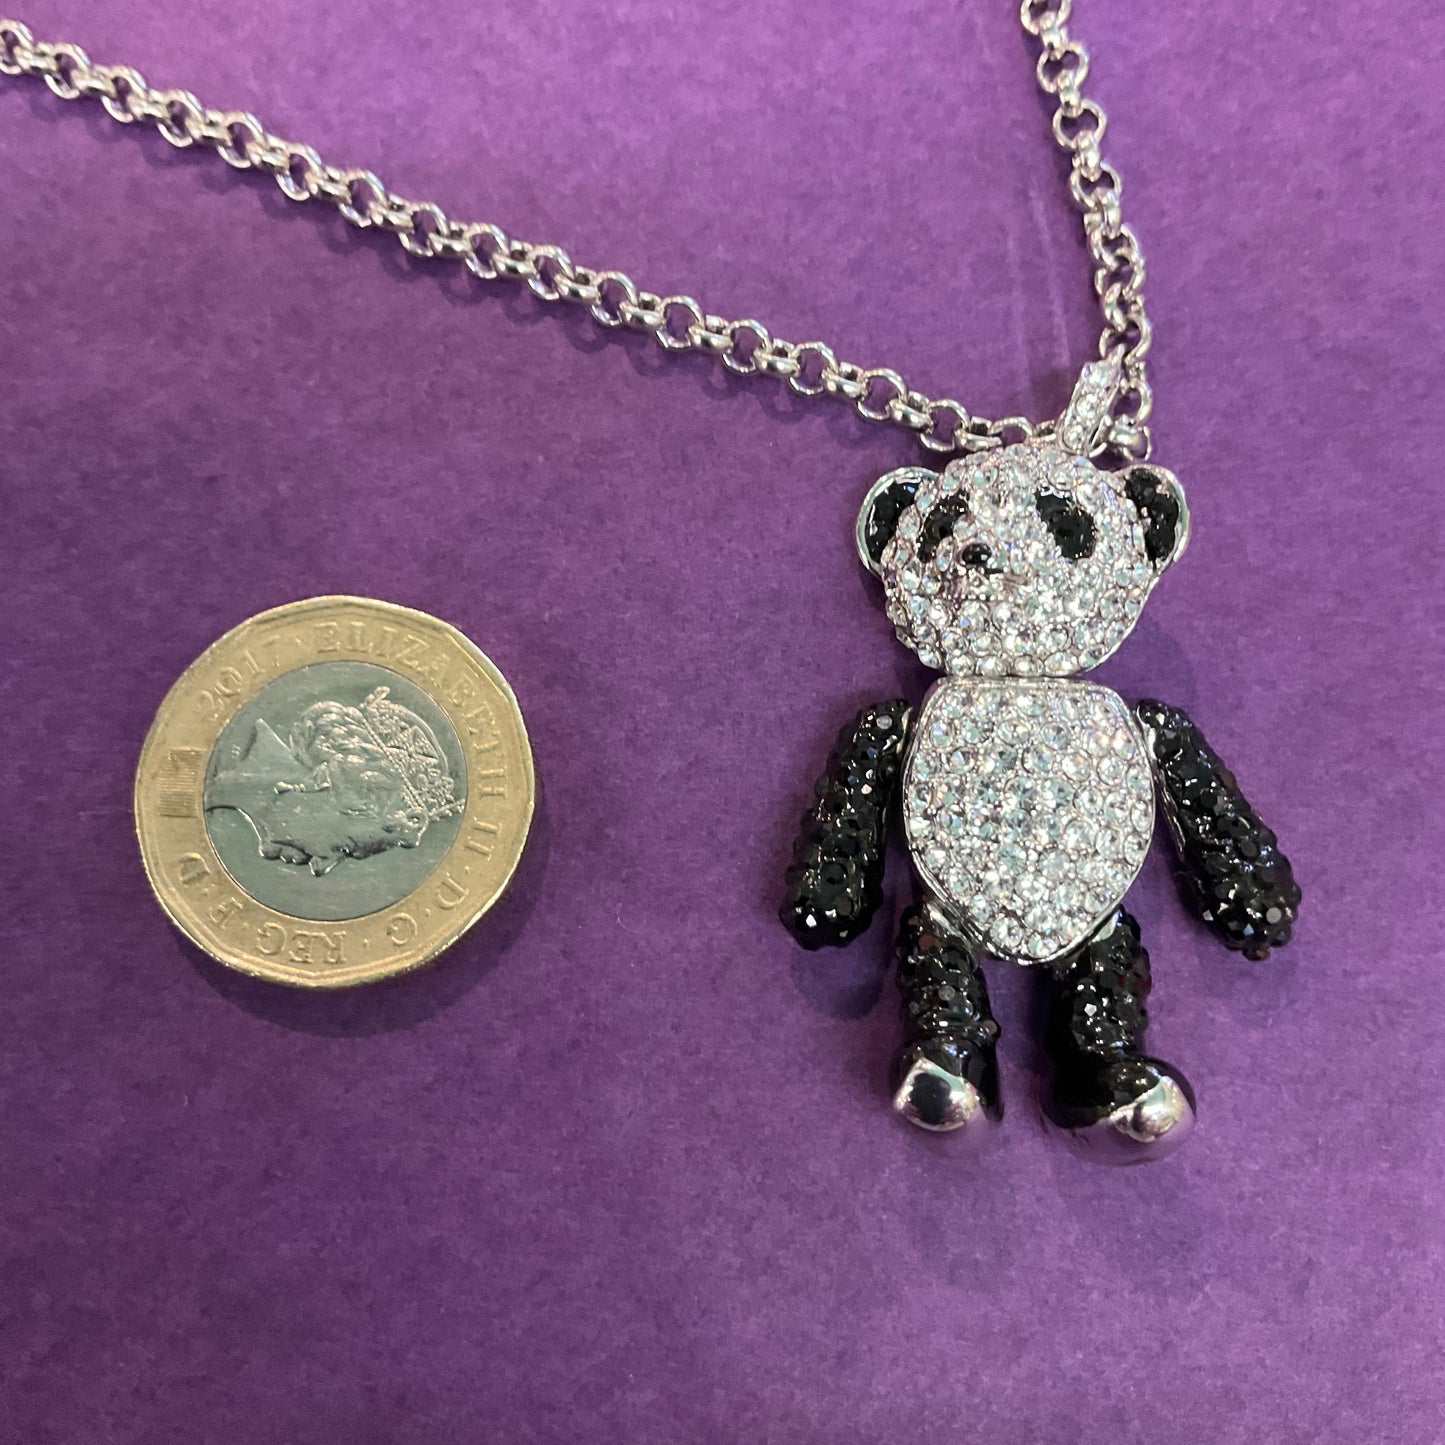 Vintage Butler and Wilson Black and silver rhinestone crystal Panda pendant, gifts for them, birthday, as new in original box